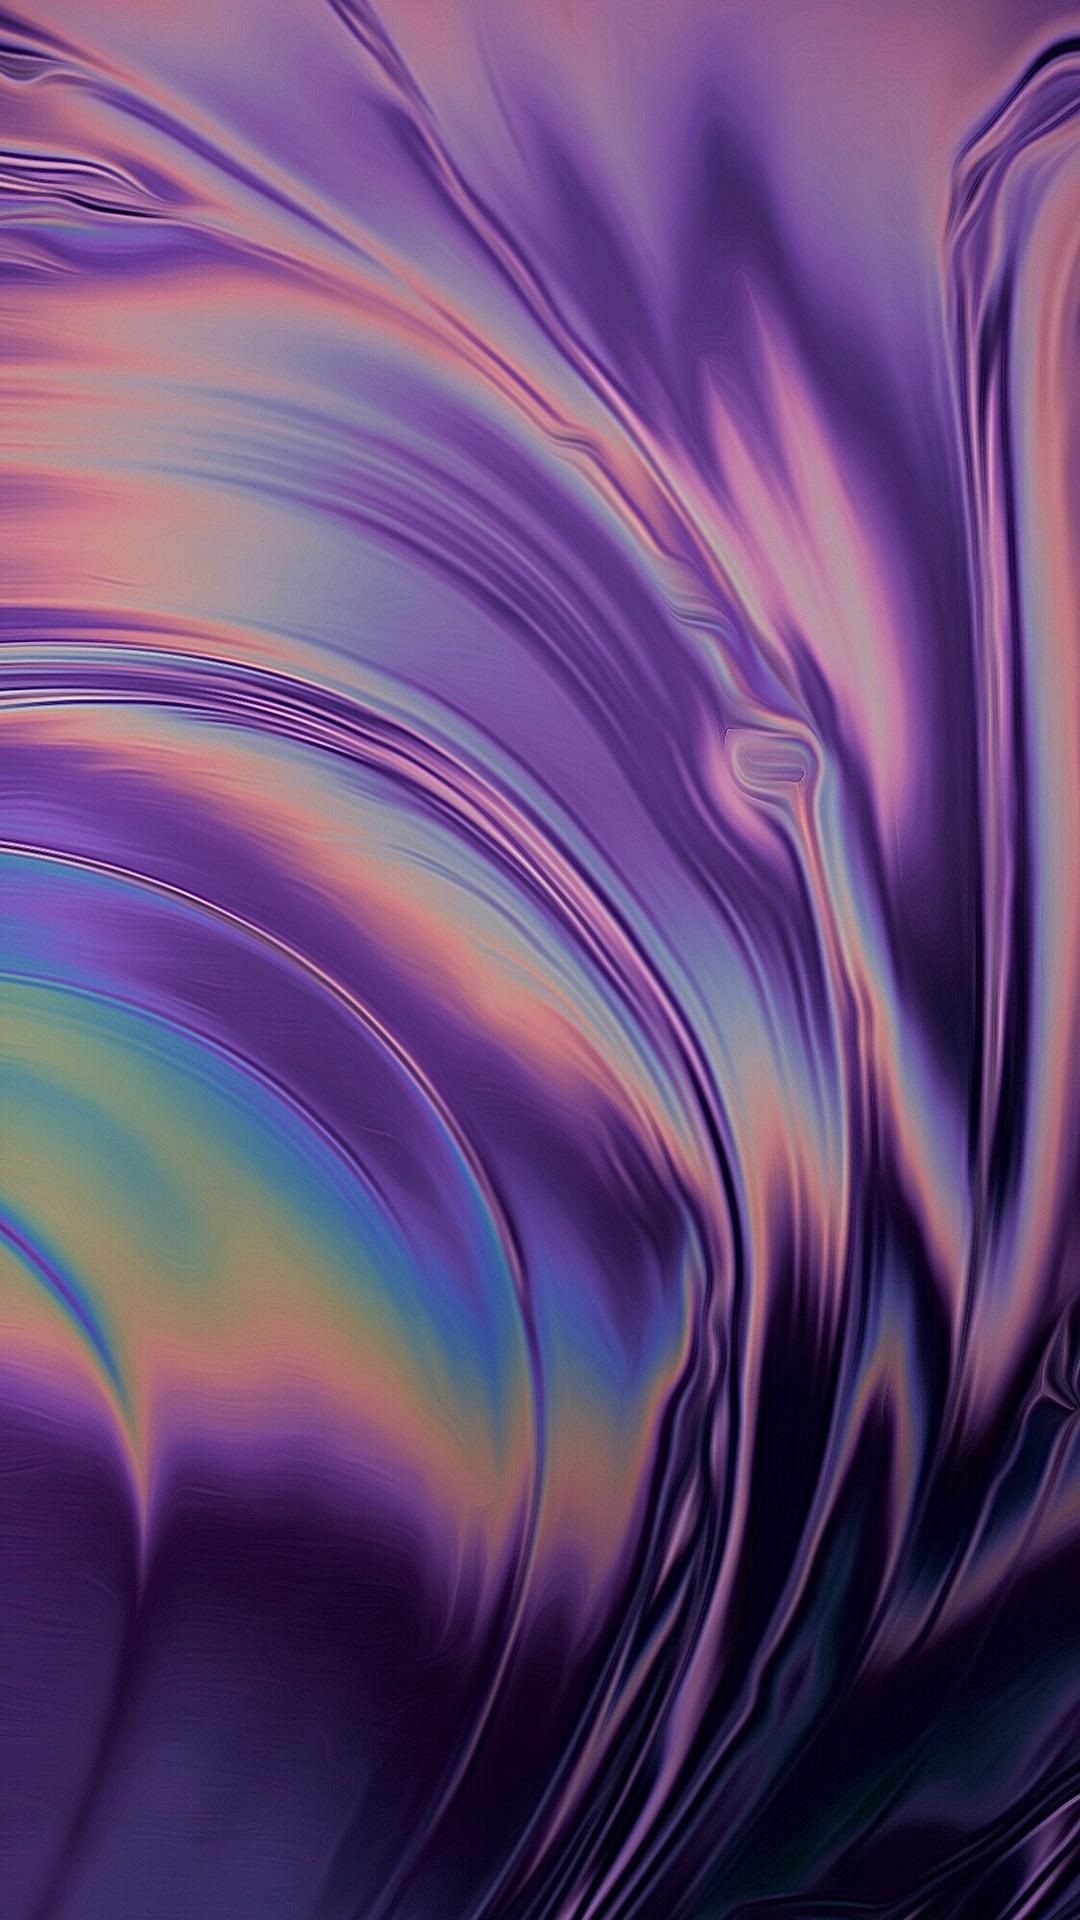 1080x1920 Last week we showed you the stunning new wallpaper that was shown off with  the release of the new MacBook Pro. Now we've got a collection of iPhone ...